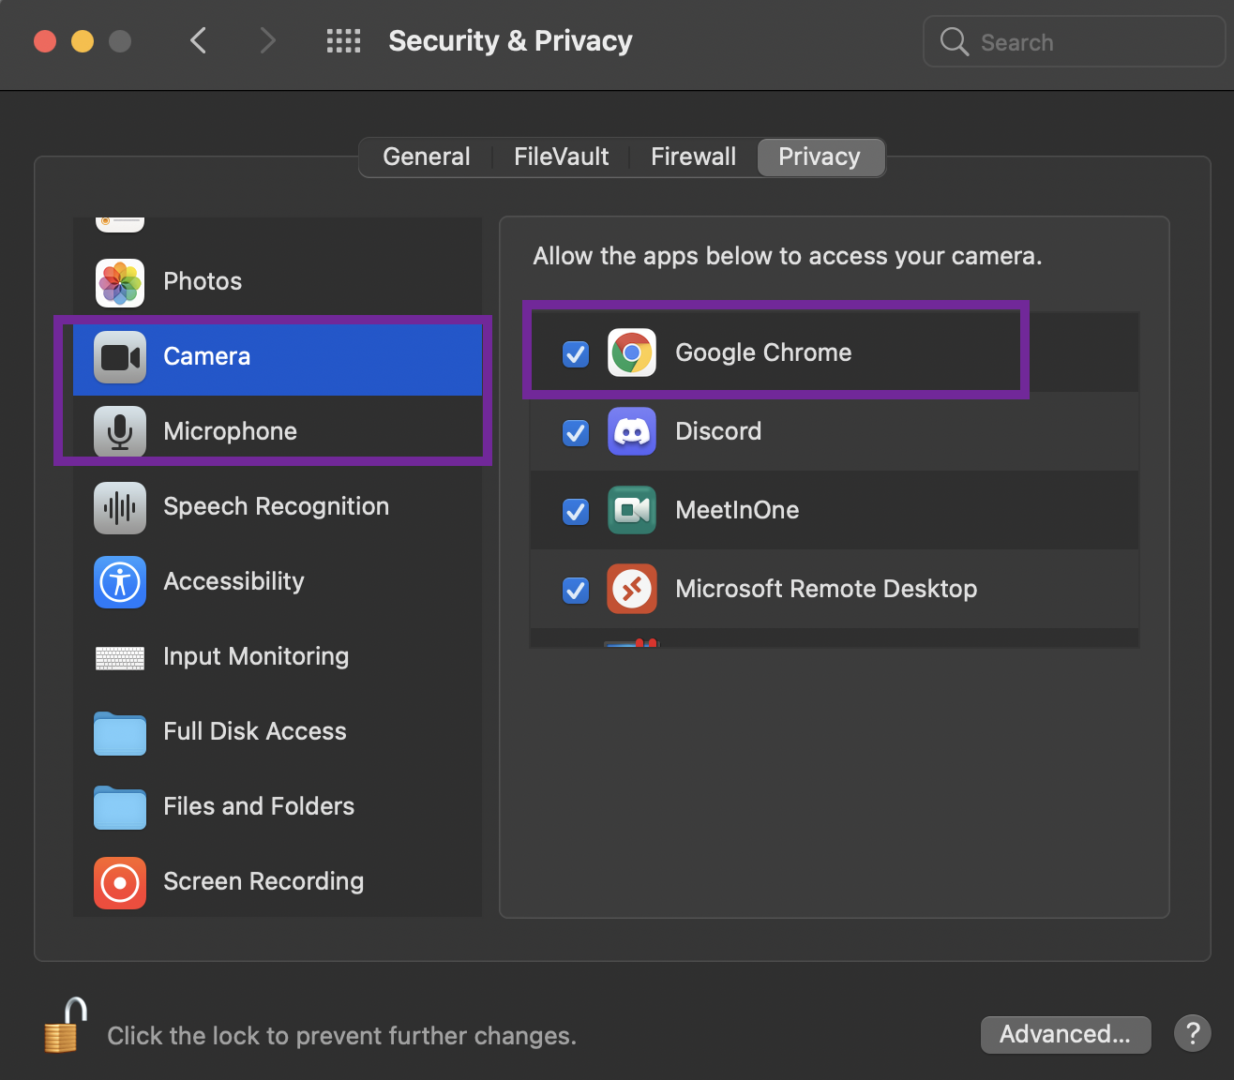 Granting Camera and Microphone access - Privacy settings